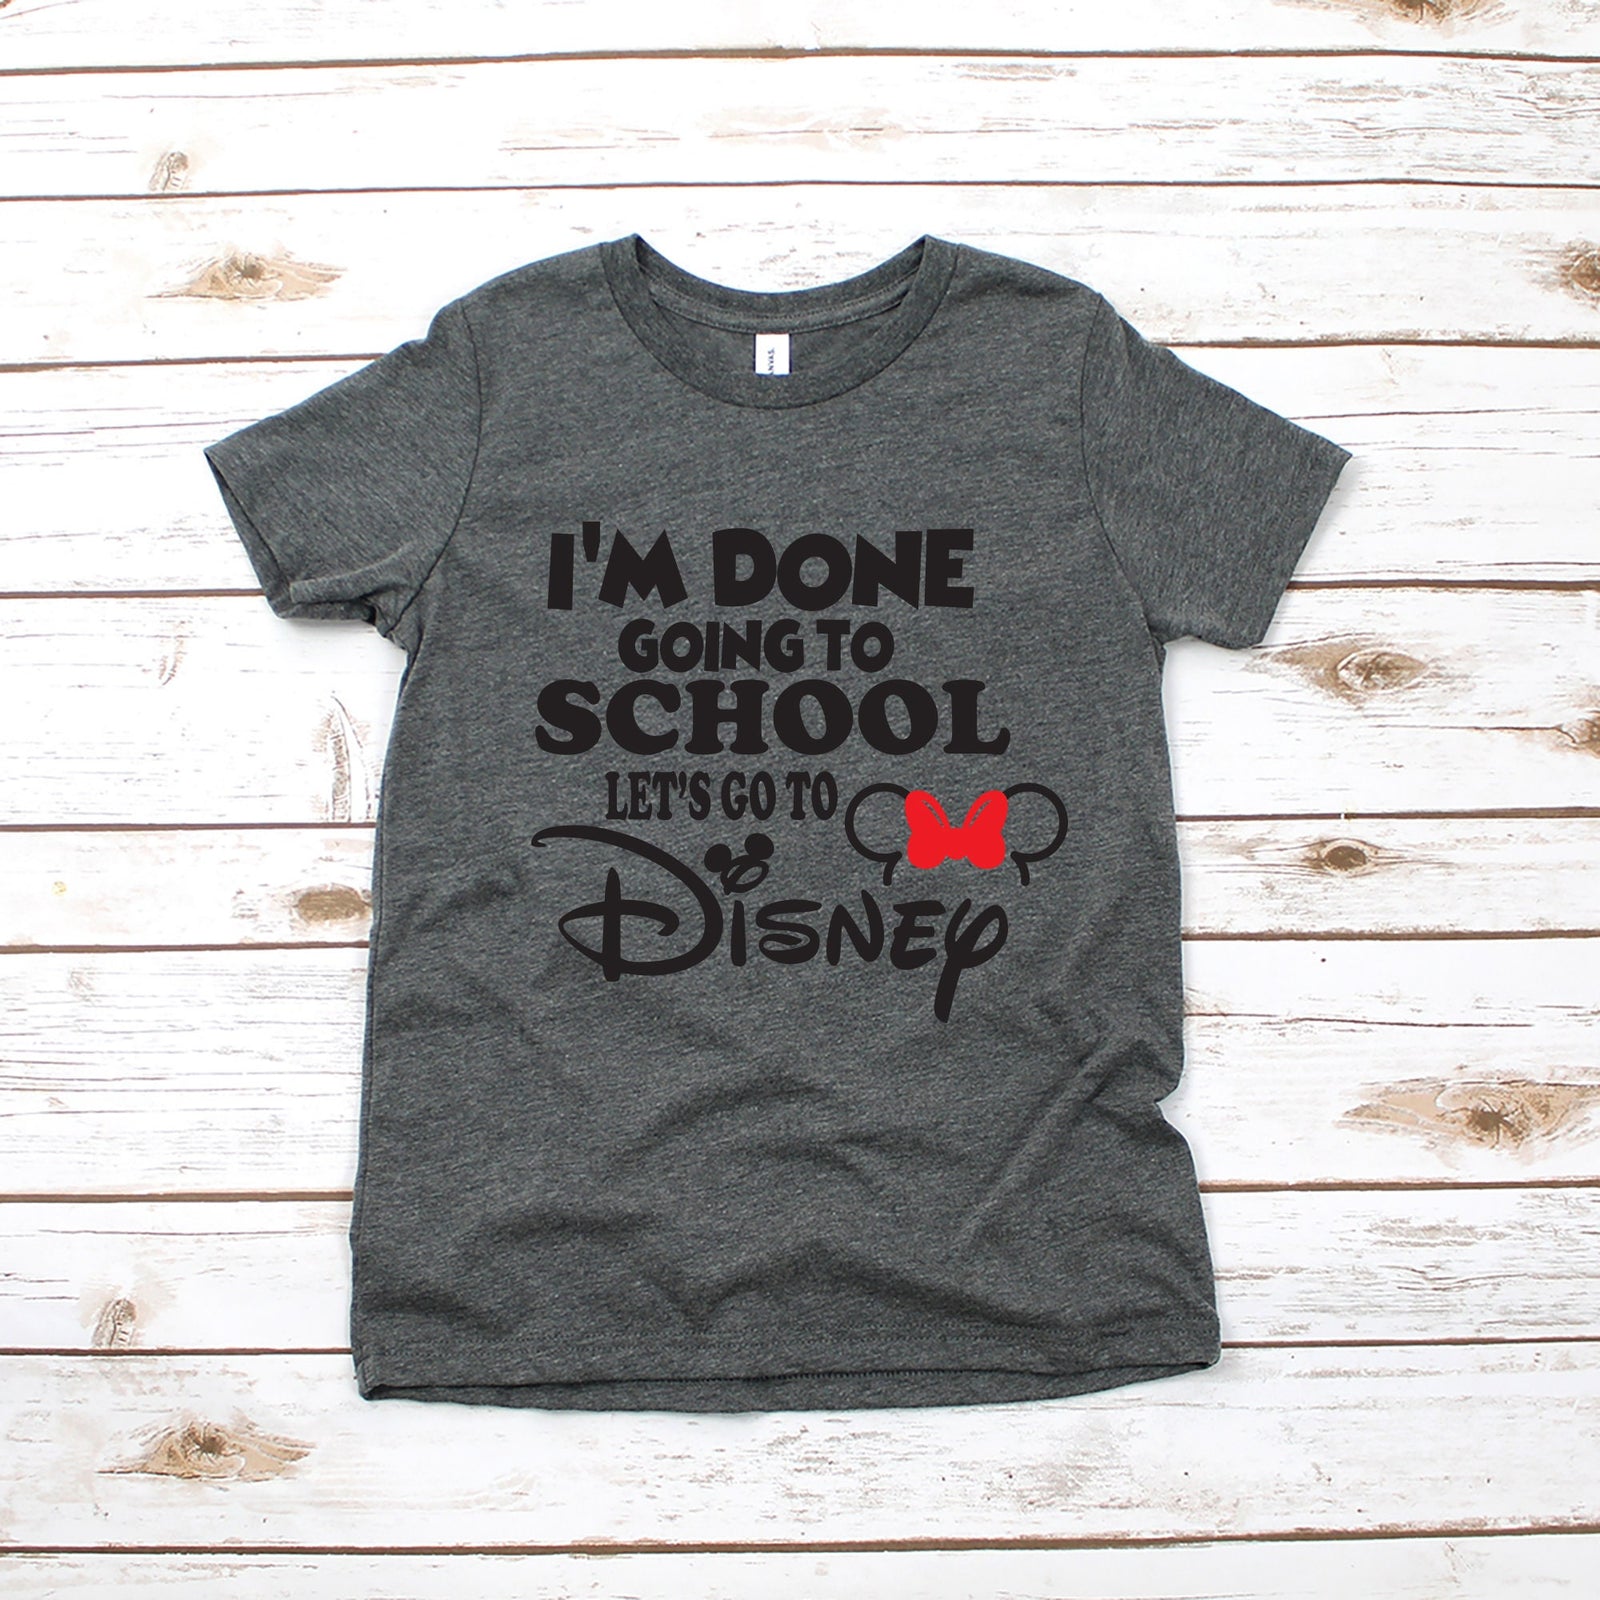 I'm Done Going to School Minnie Mouse Disney Kids Shirt - Infant Toddler & Youth Shirt -Let's Go to Disney